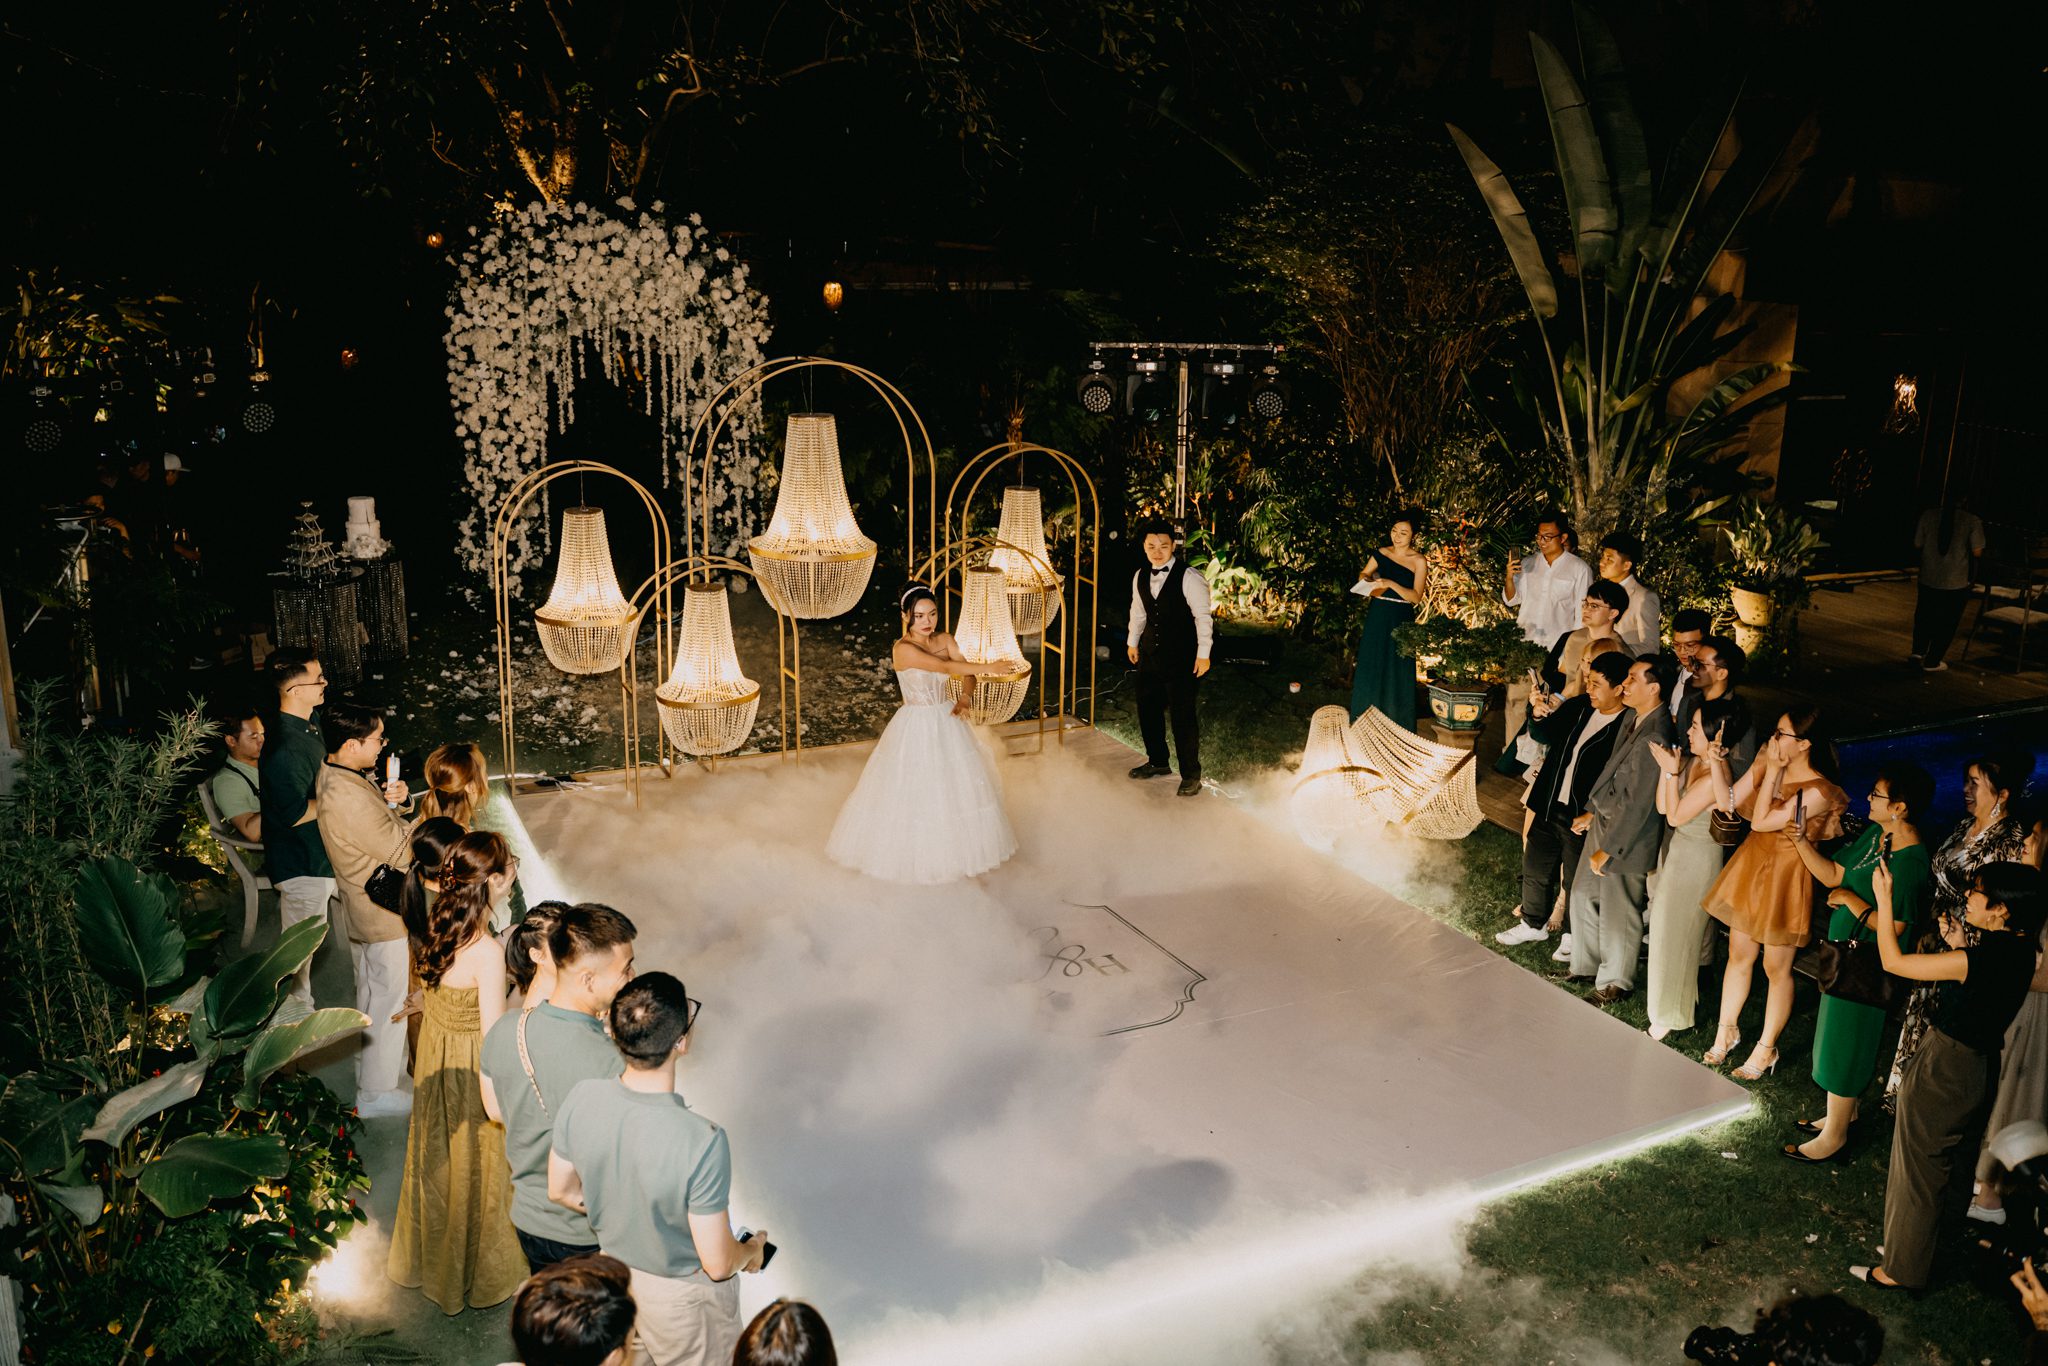 Saigon intimate wedding at An Lam Retreat 01662 - The Planners